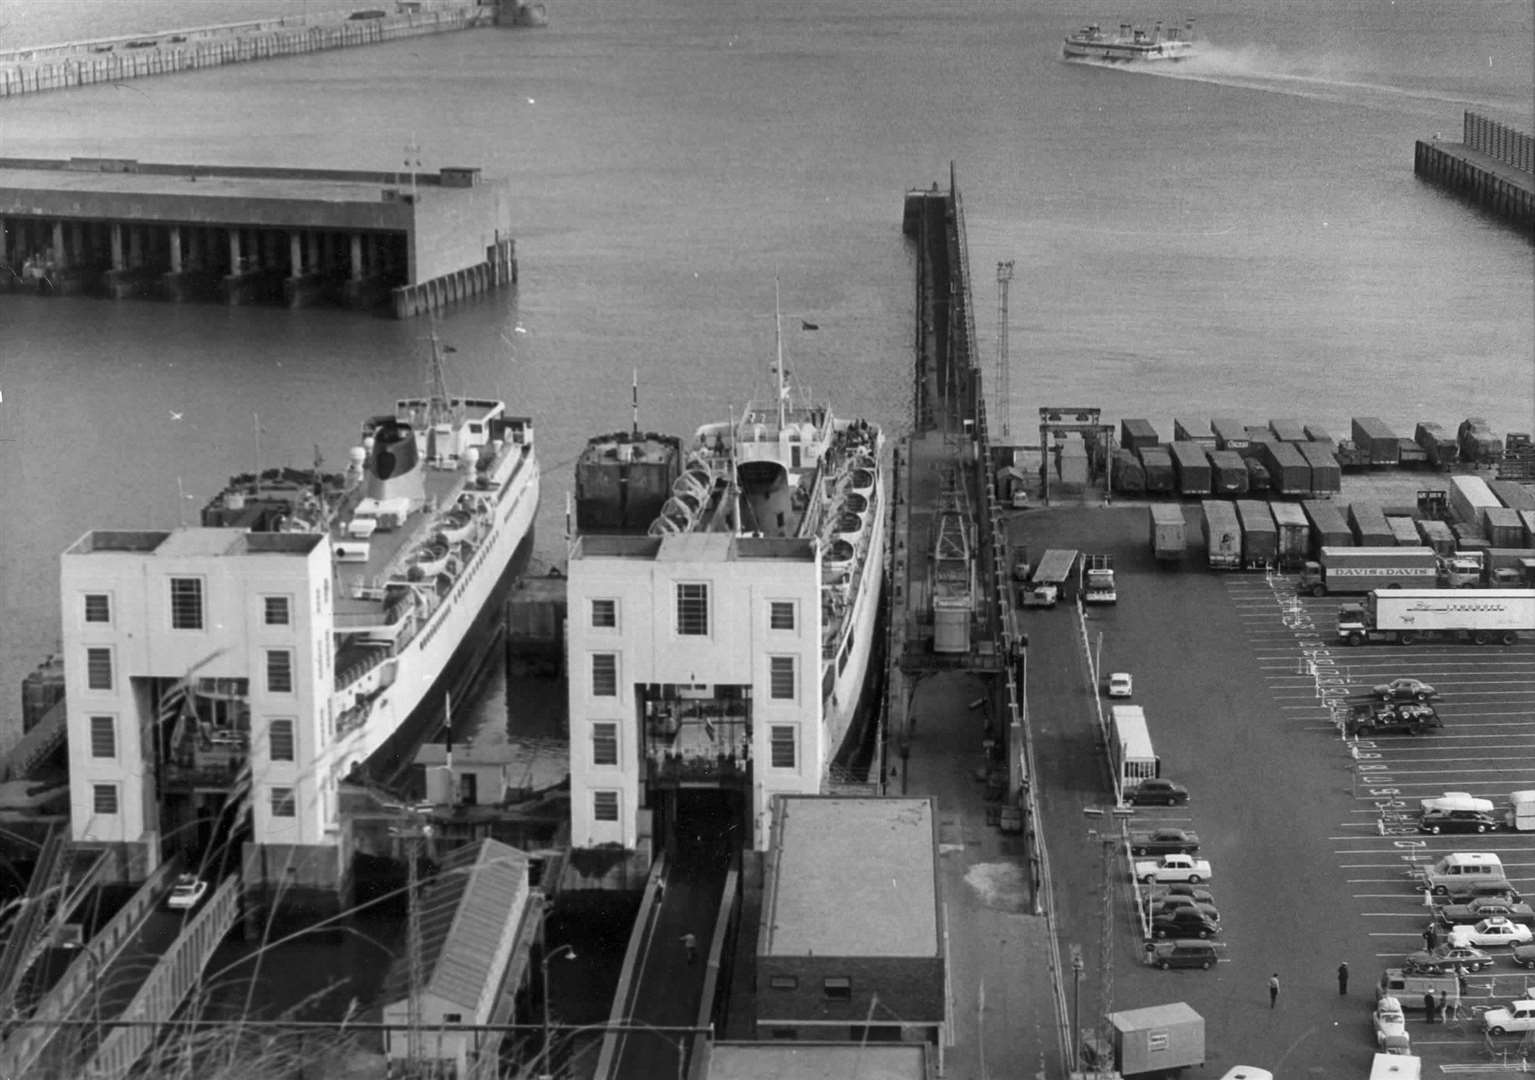 Looking down on the Port of Dover in August 1971